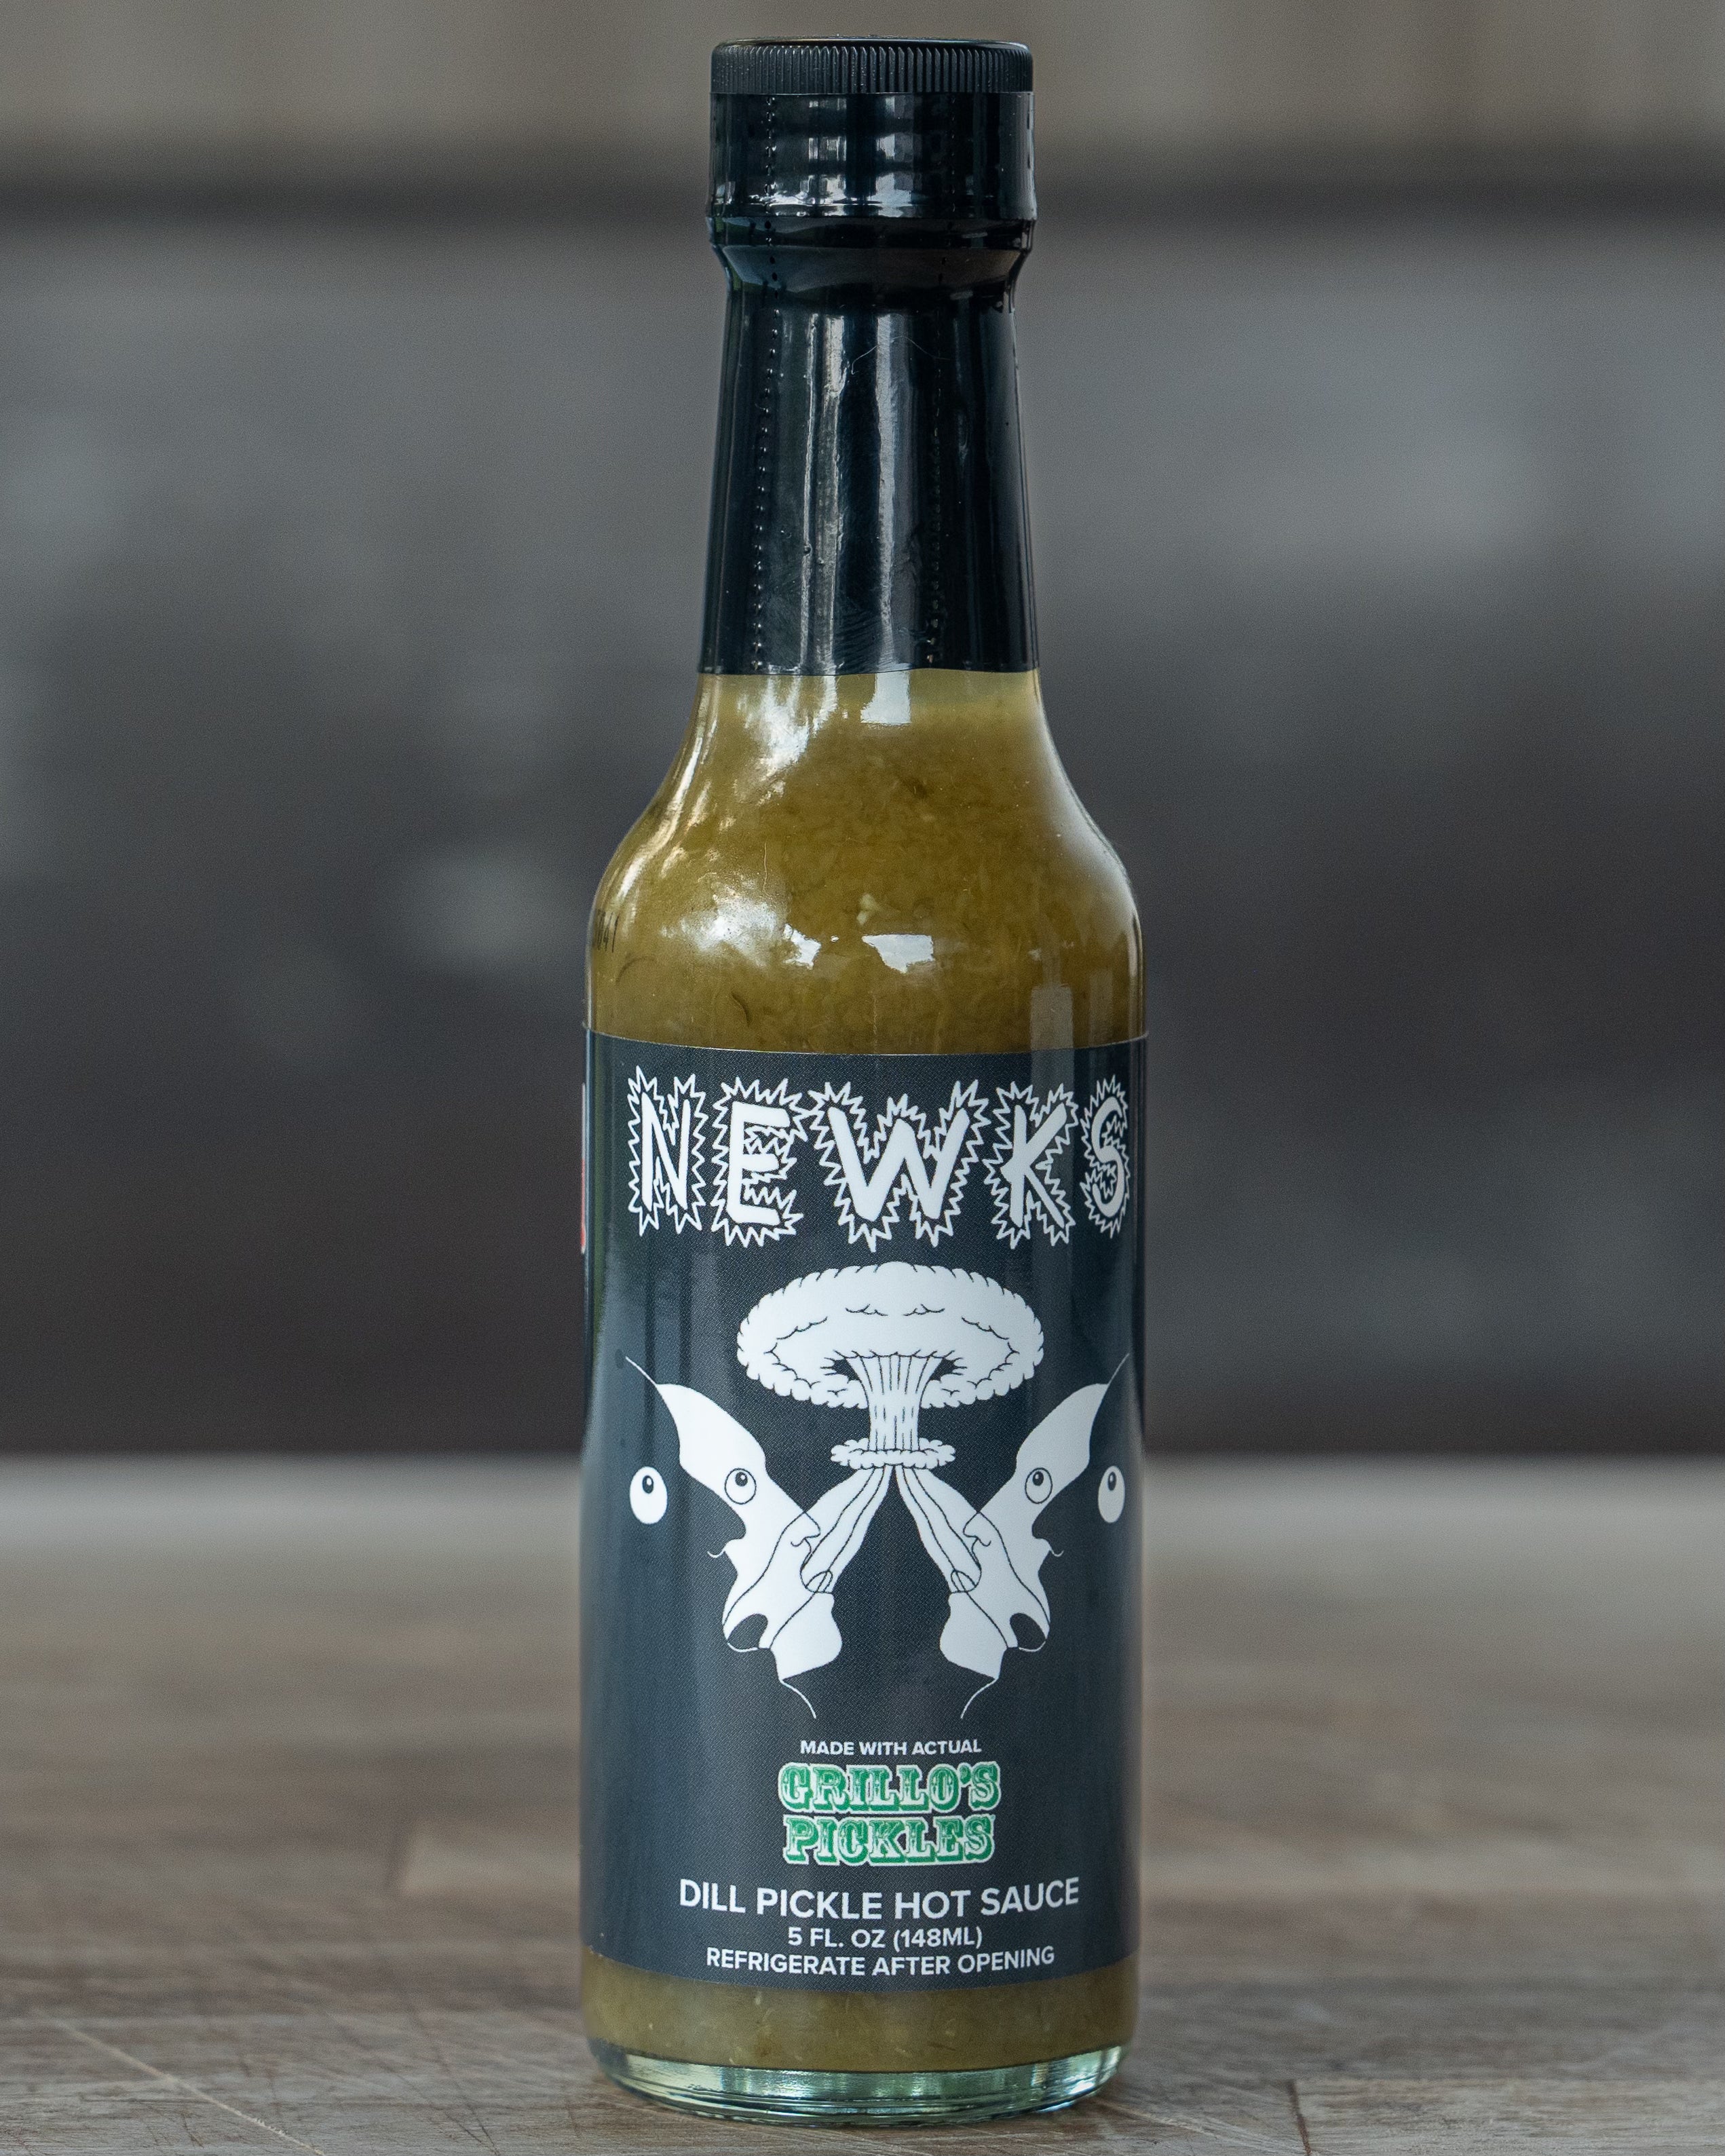 Newks Dill Pickle Hot Sauce